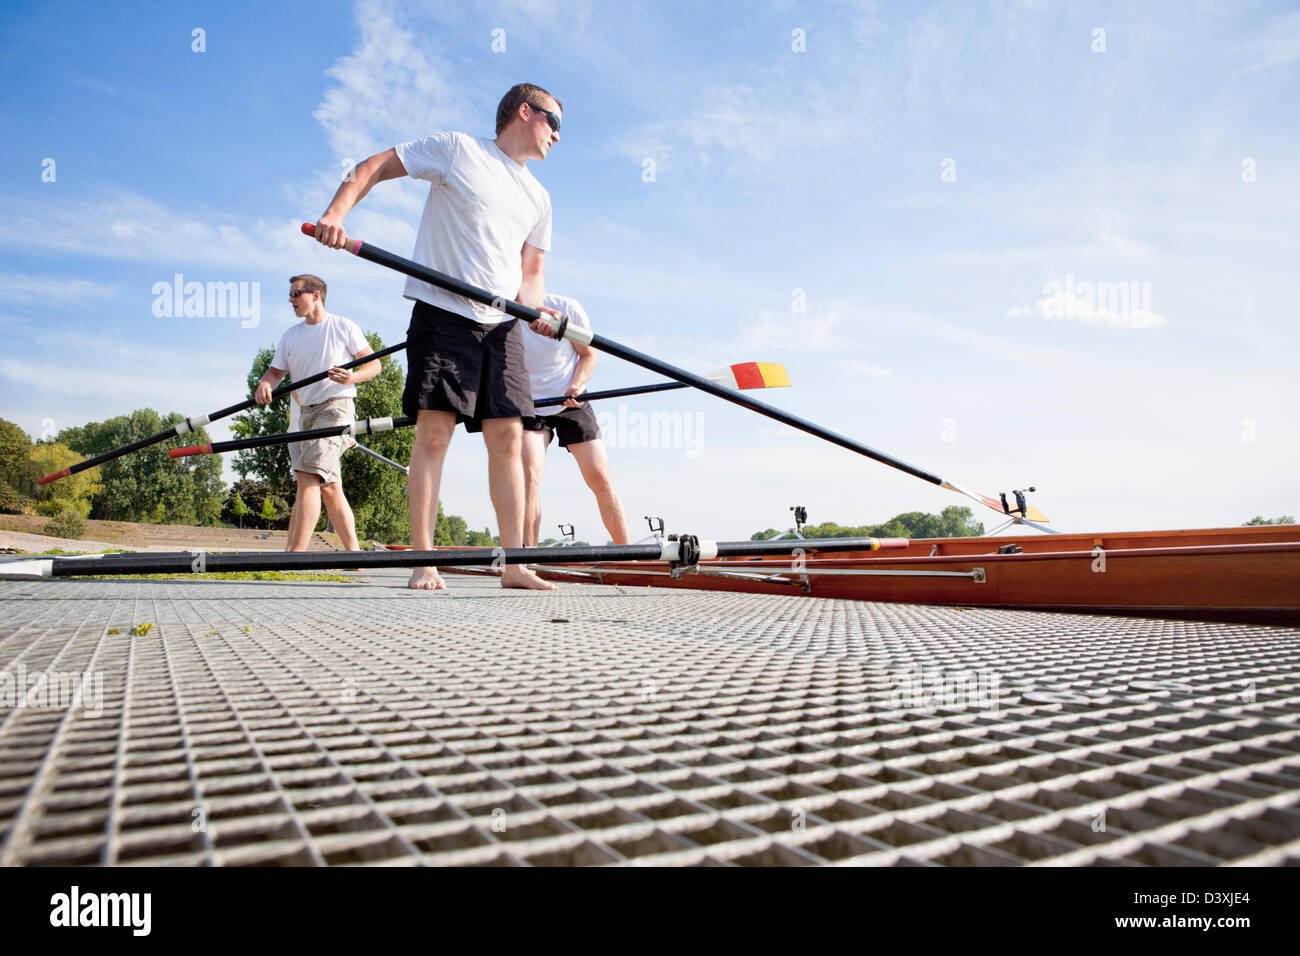 Teamwork Concept of Men Rowing Team Setting Paddles and Boat Stock Photo